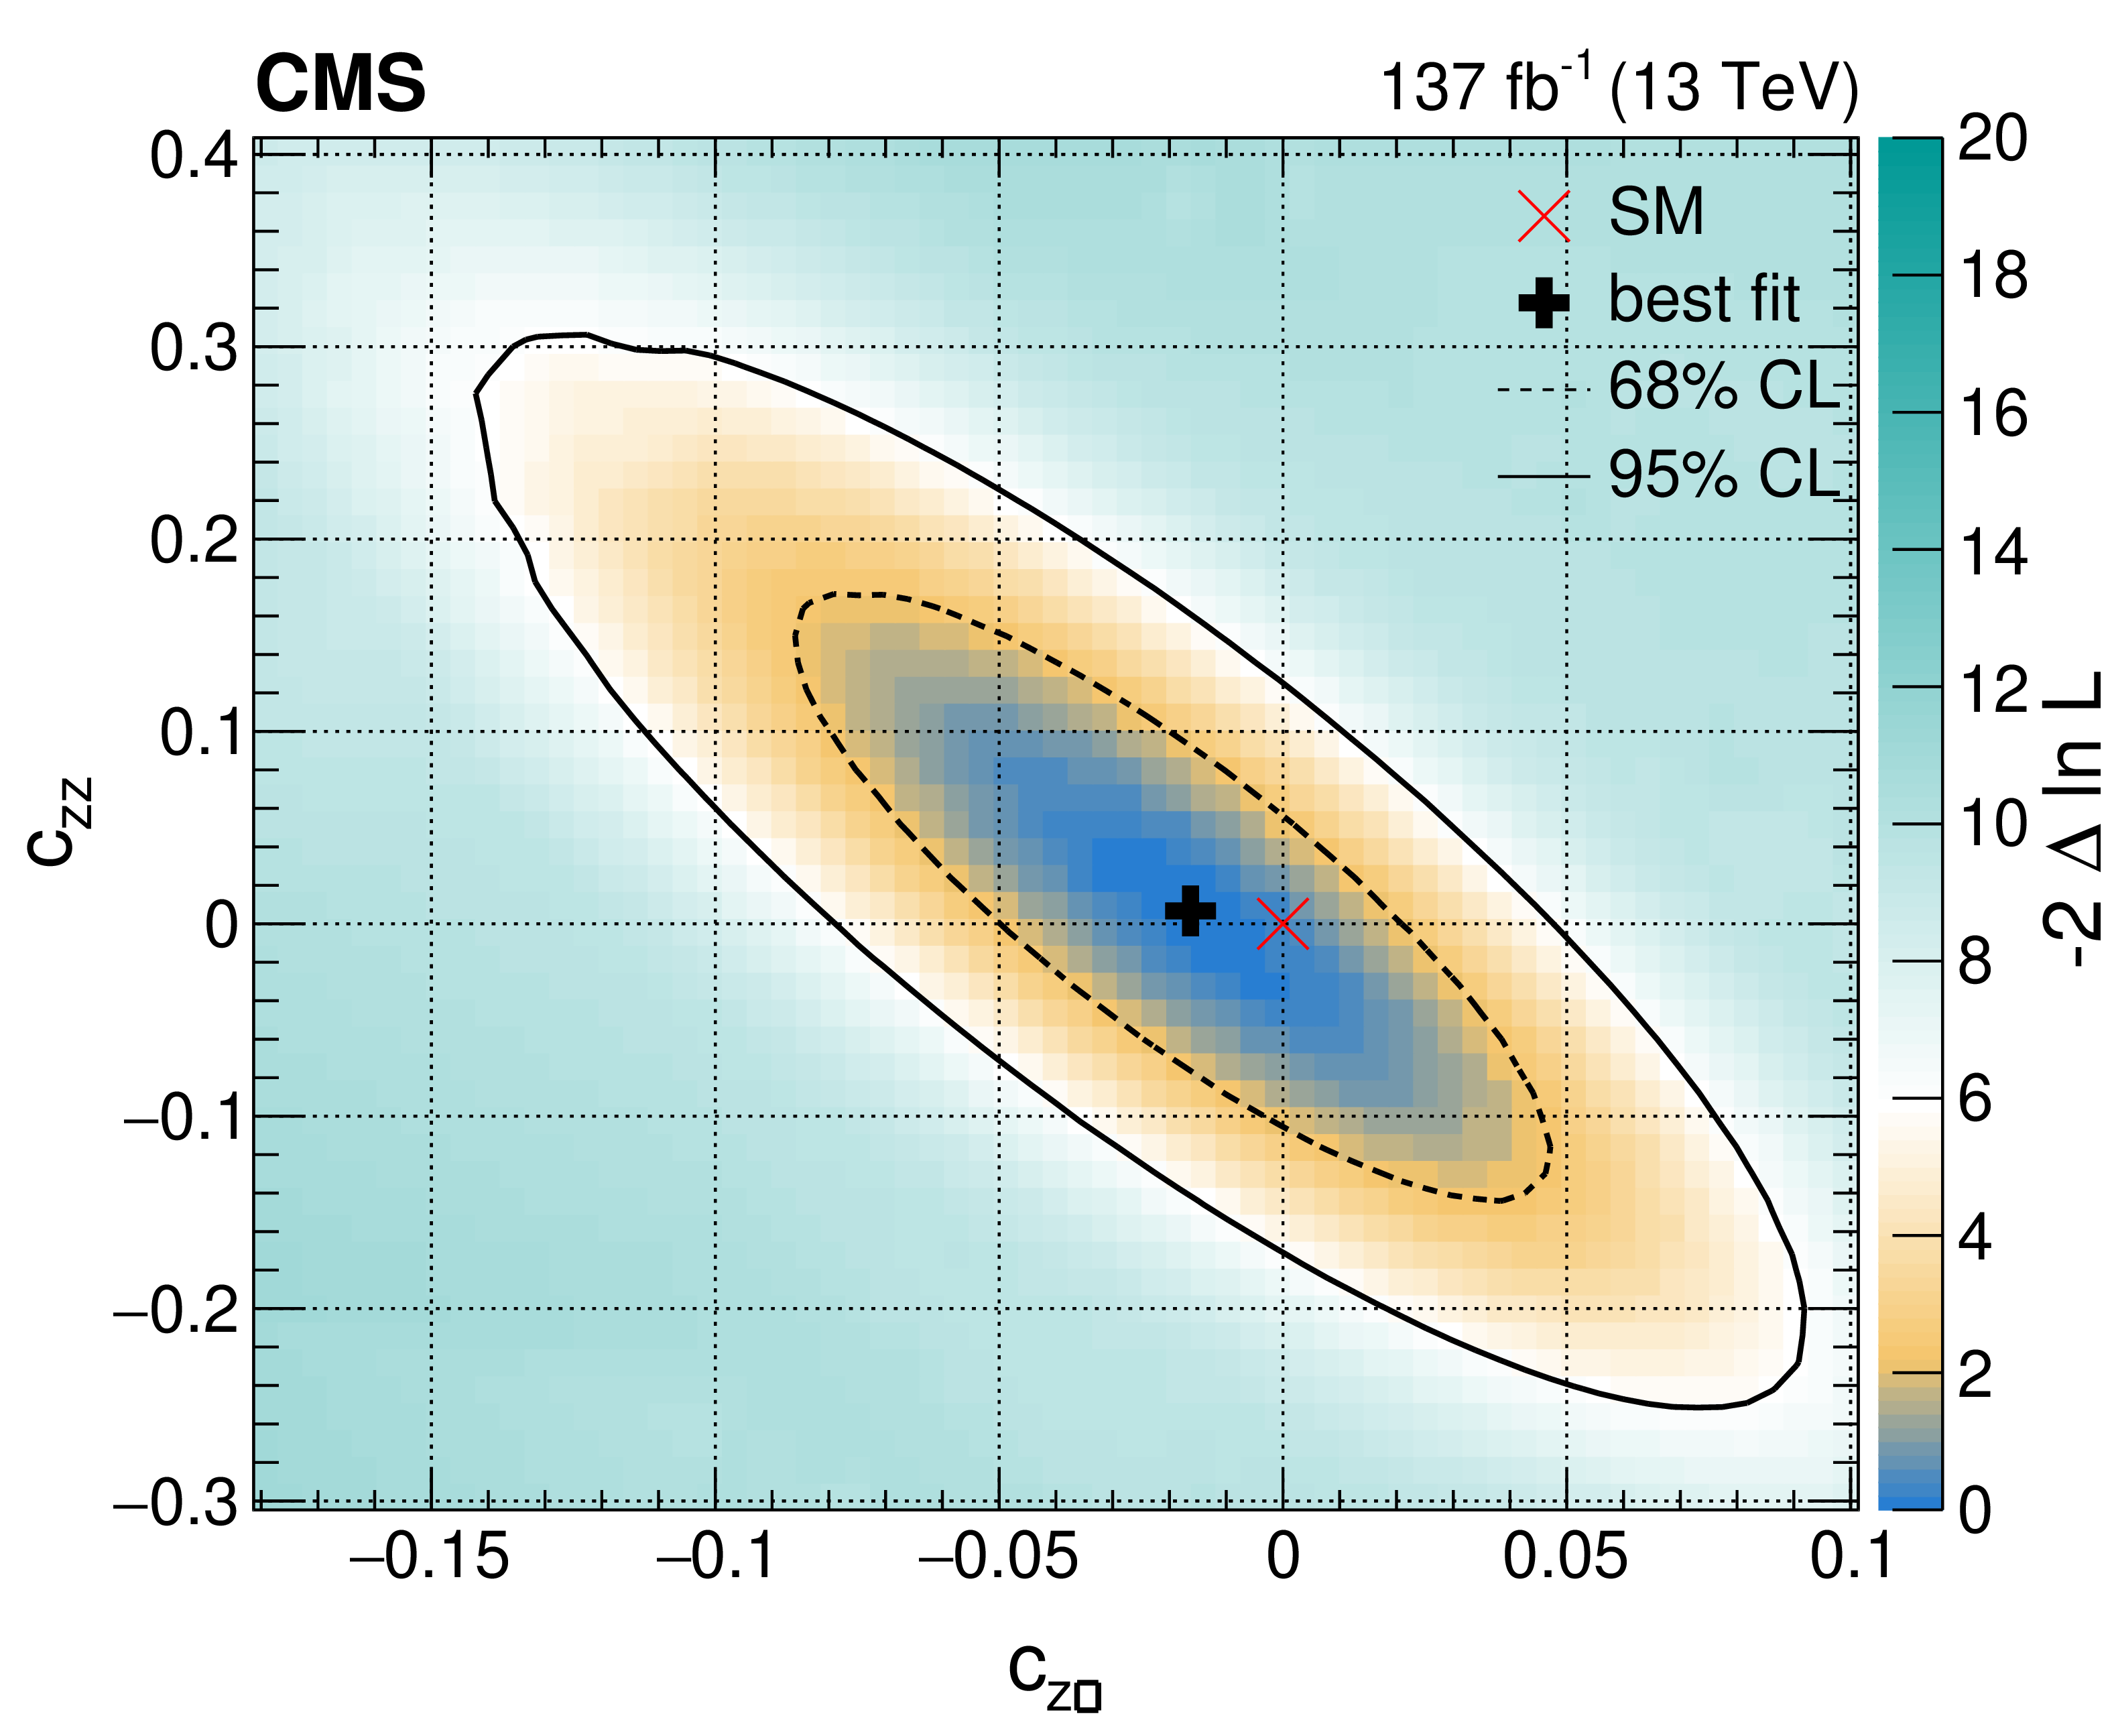 more results of the measuremnt of the Higgs boson interaction with vector bosons